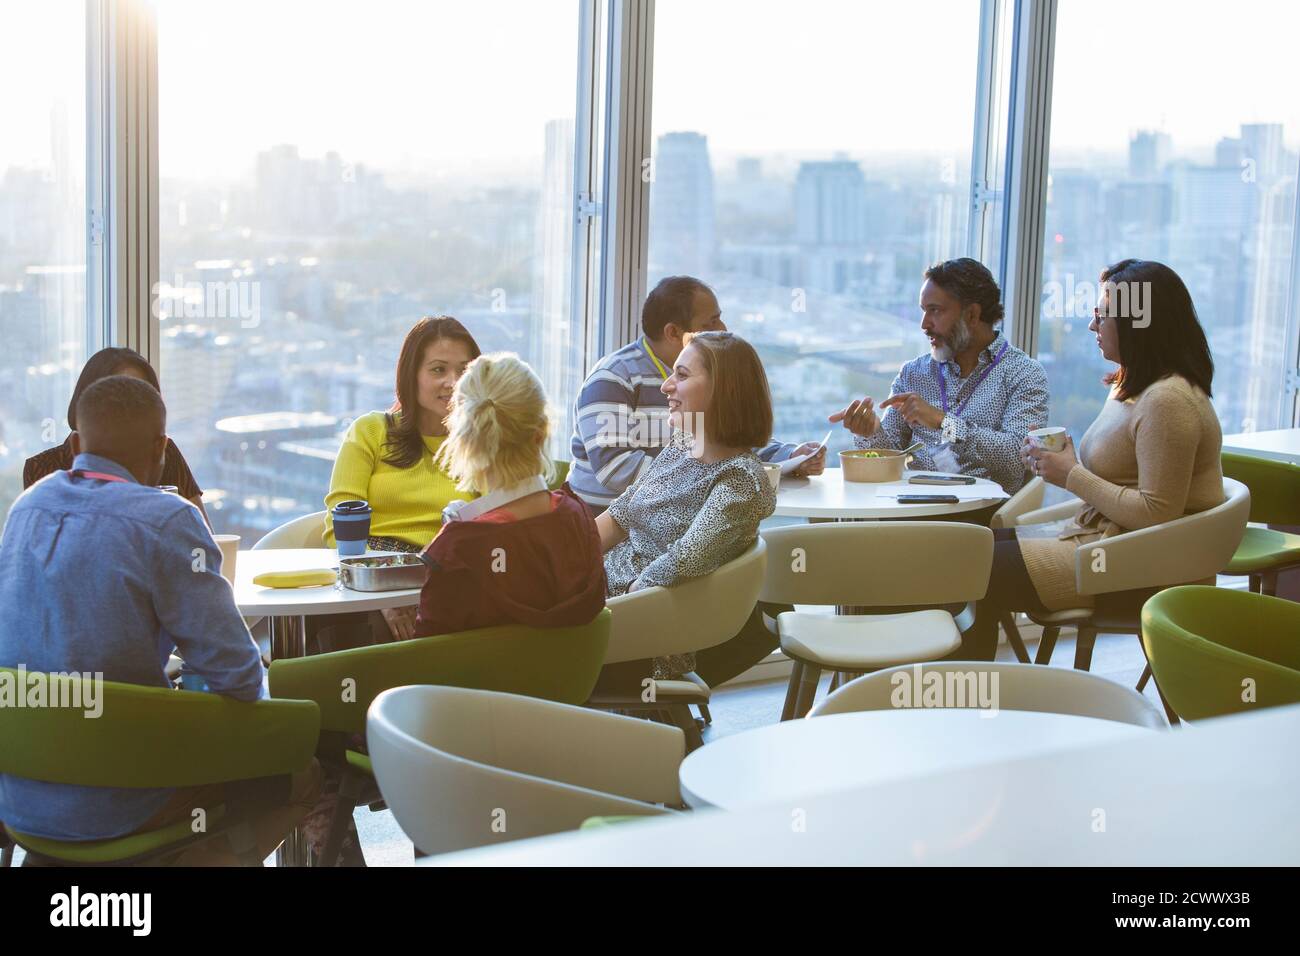 Business people eating lunch and socializing in highrise cafeteria Stock Photo